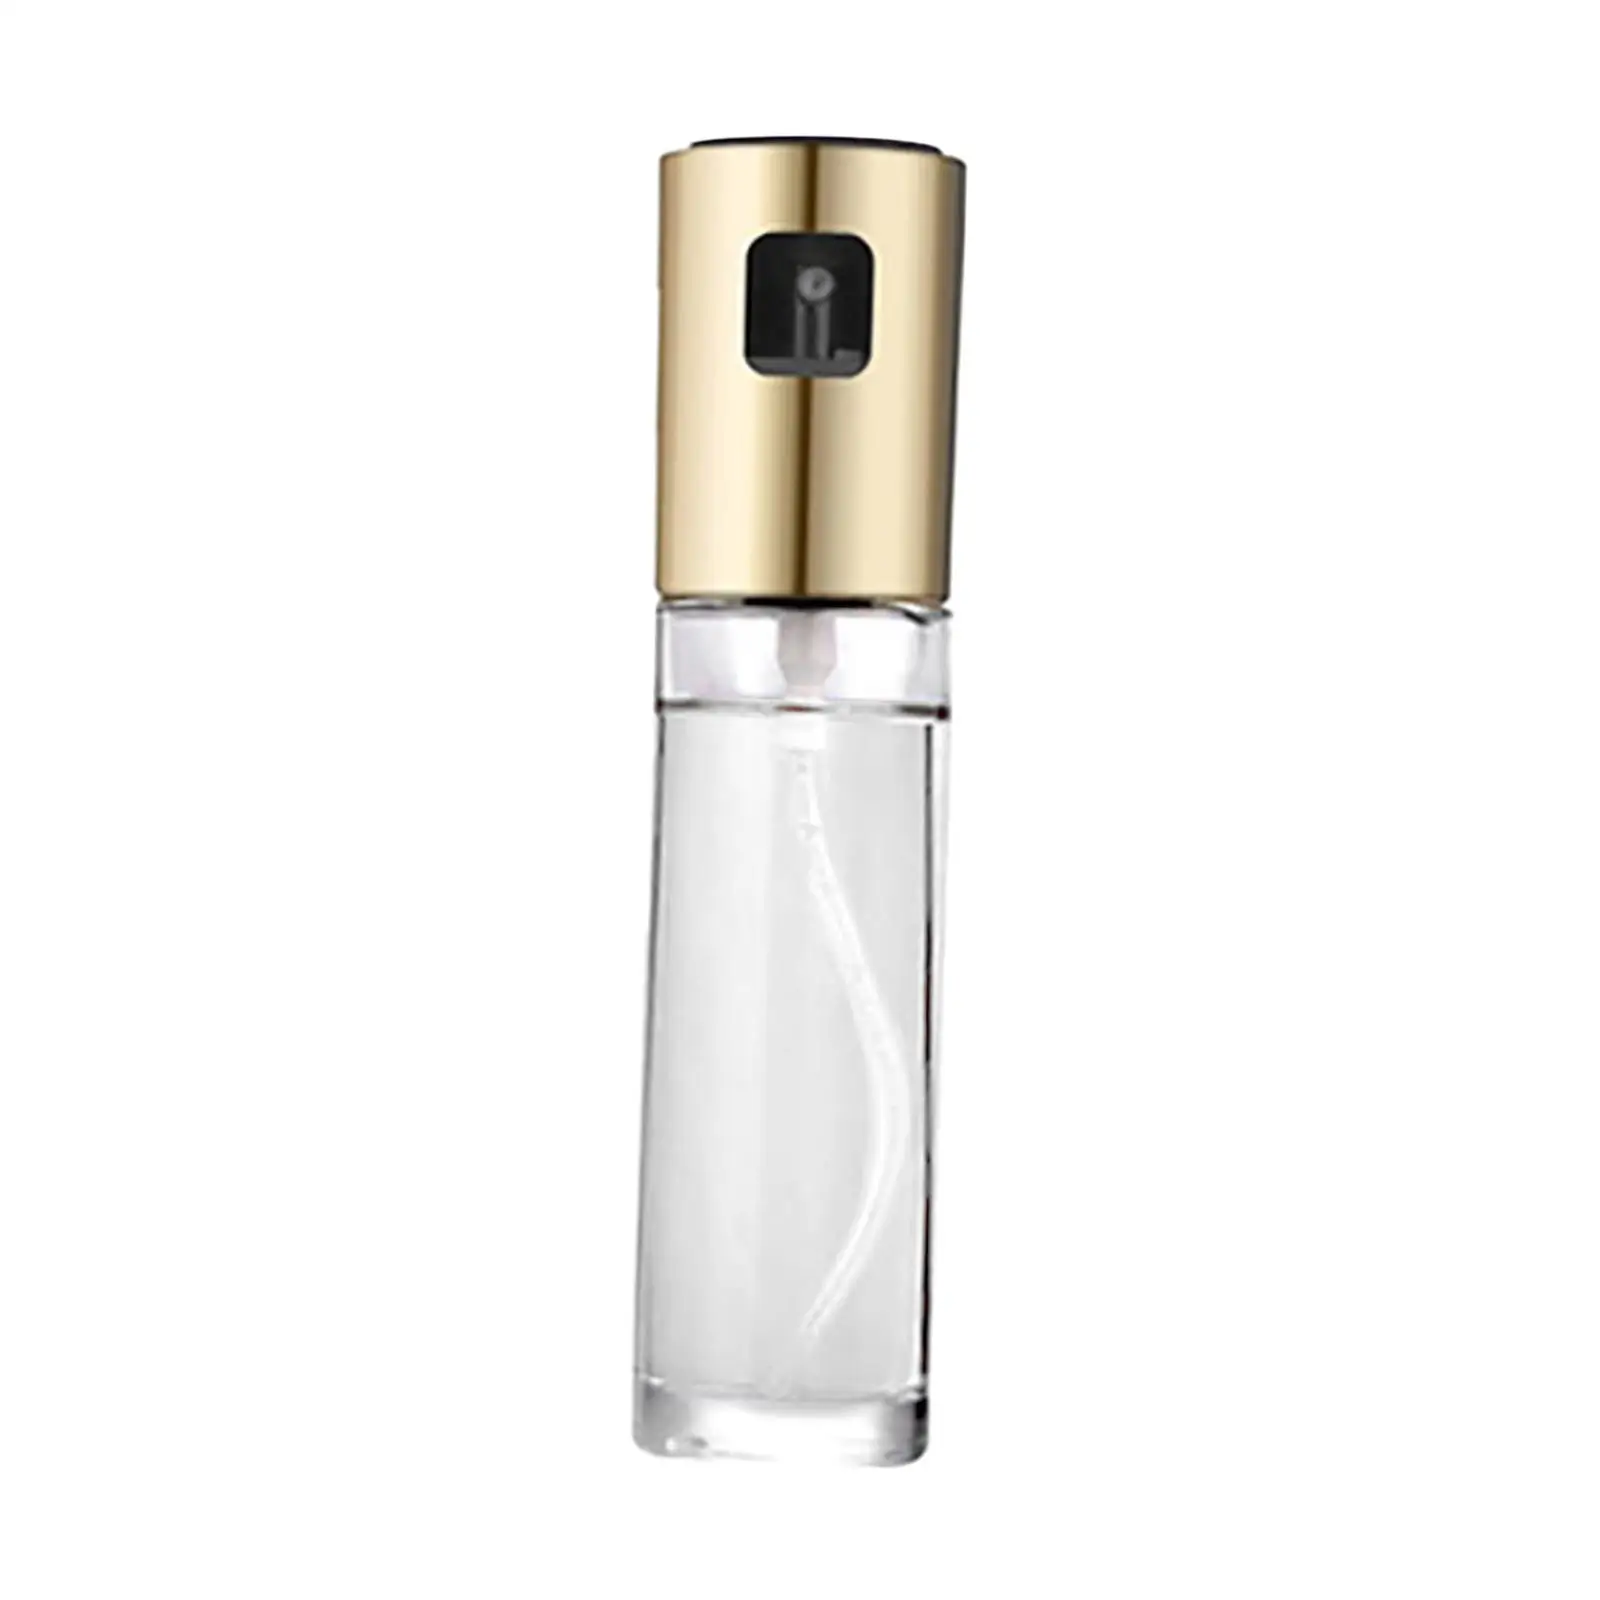 Olive Oil Sprayer Mister, Water and Liquids Sprayer, Vinegars Spray Dispensers, Olive Oil Sprayer for Barbecue